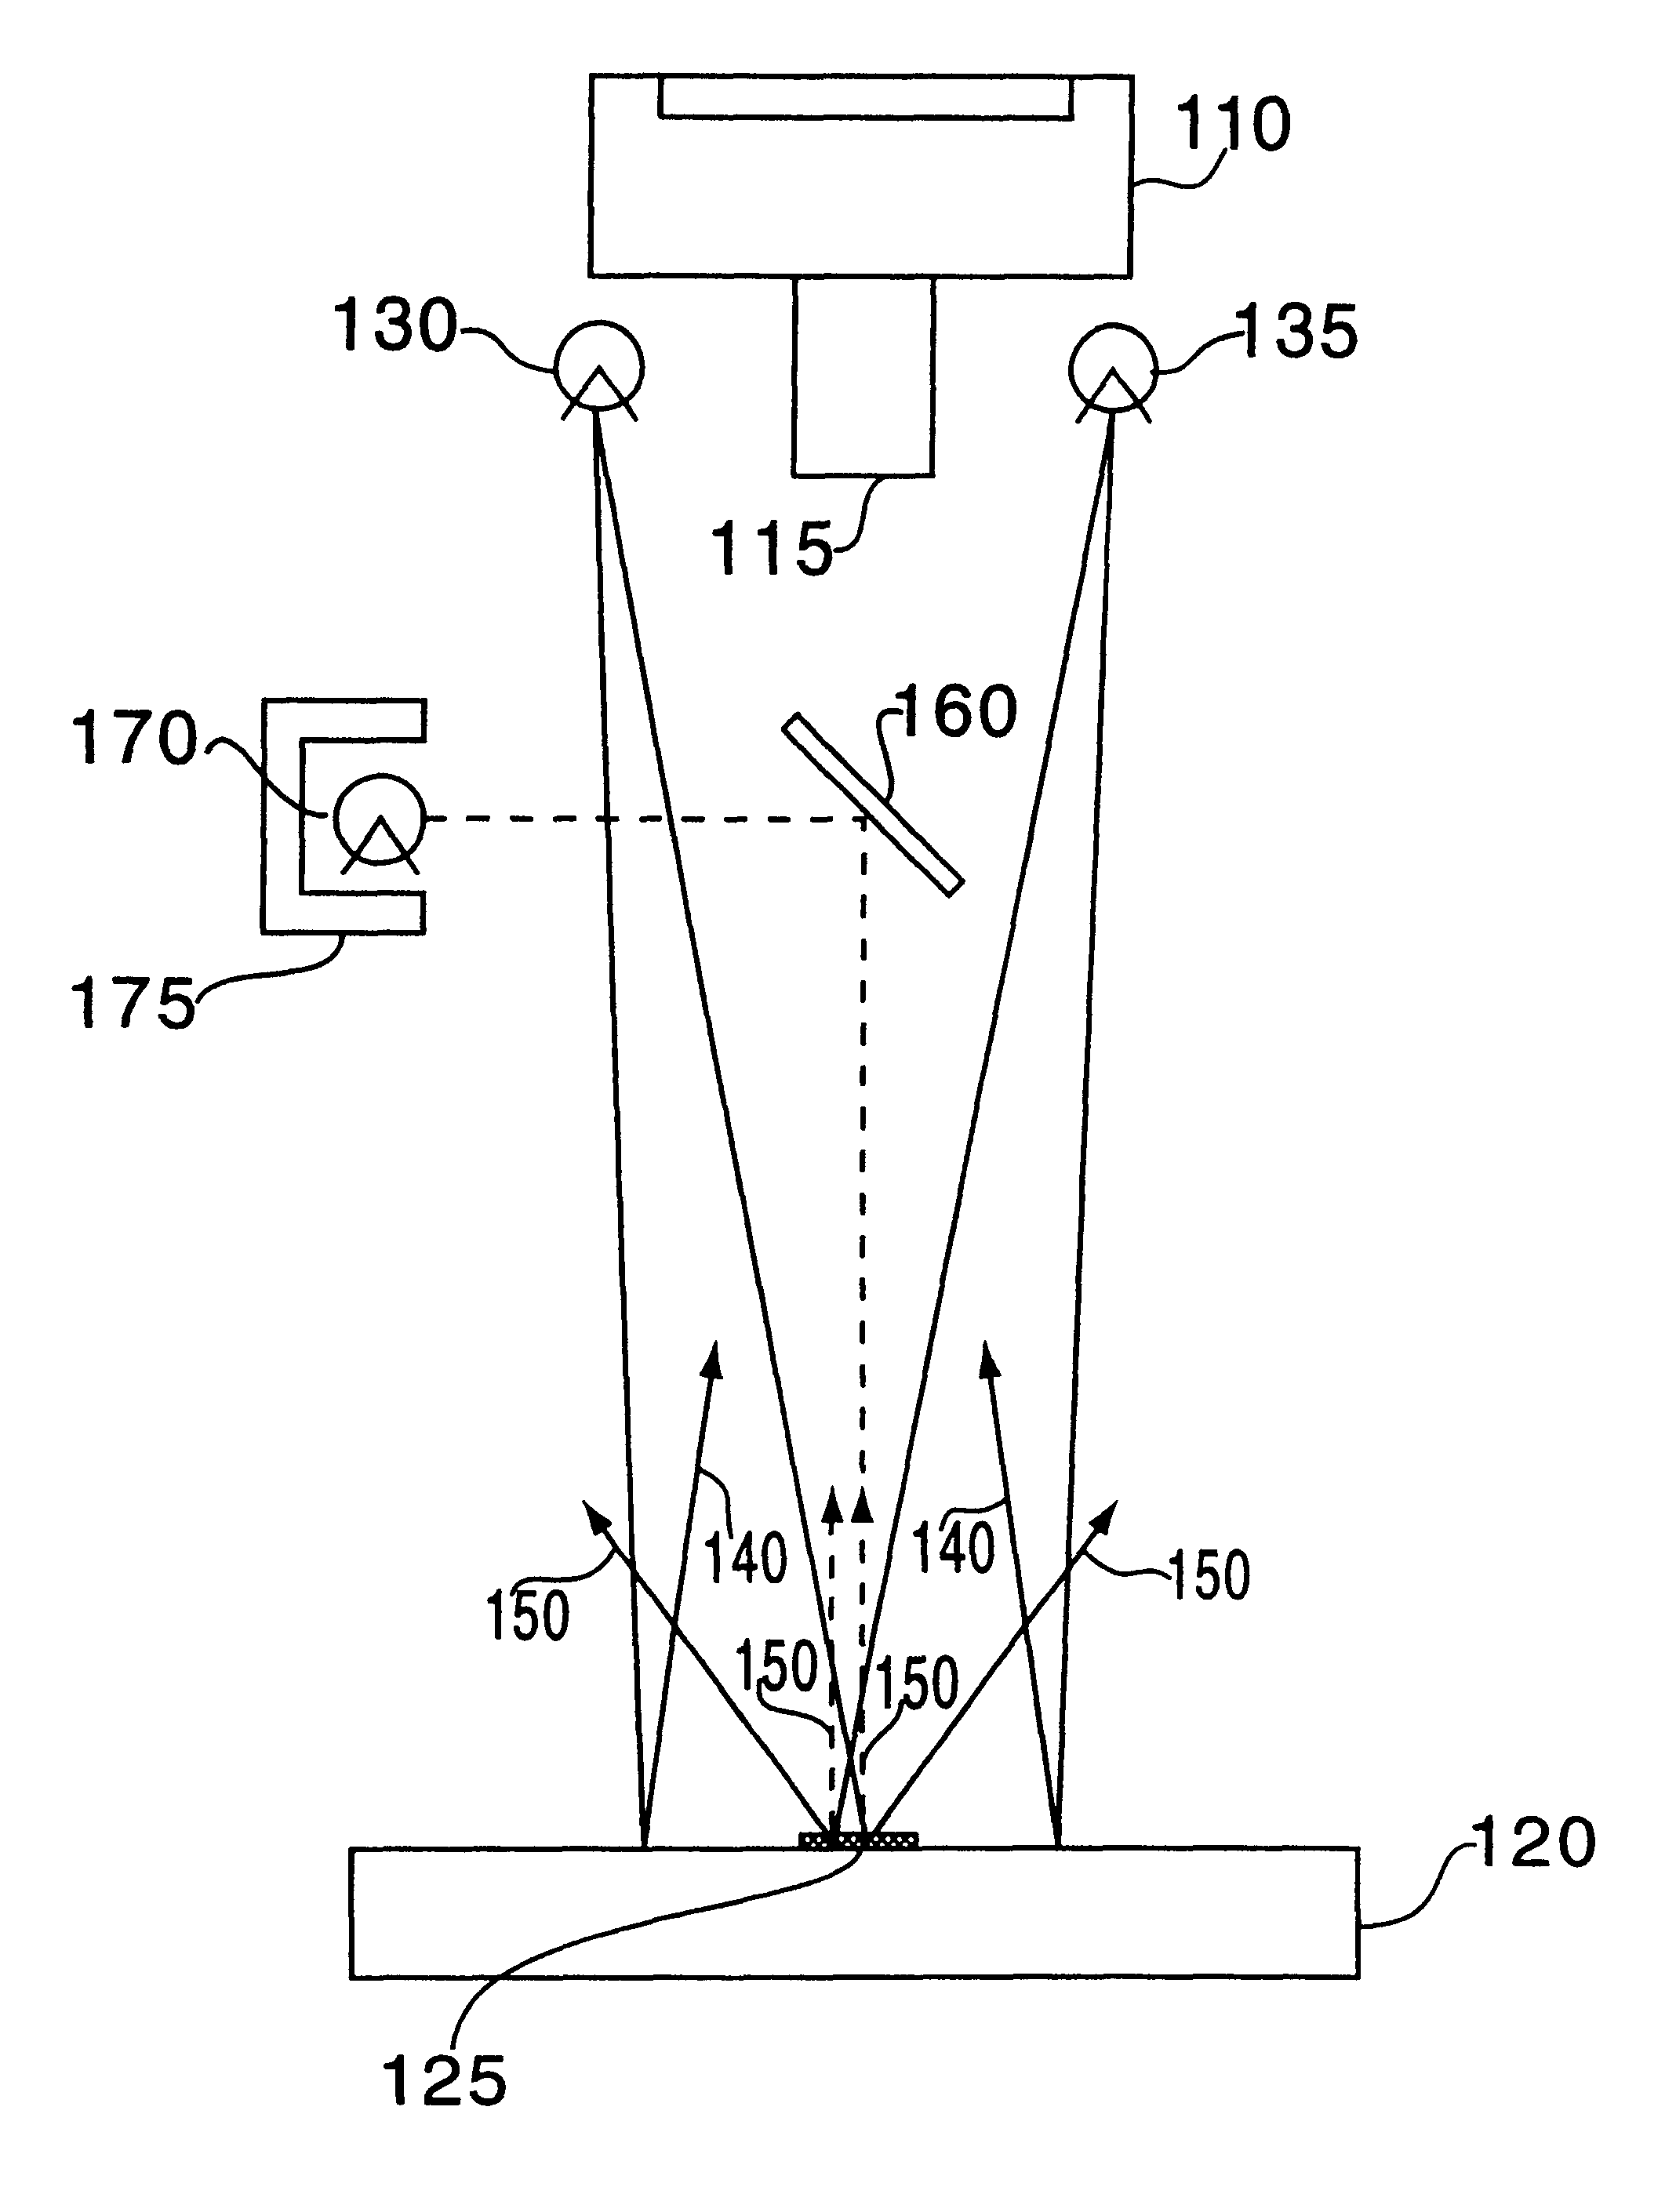 Method and system for imaging an object or pattern